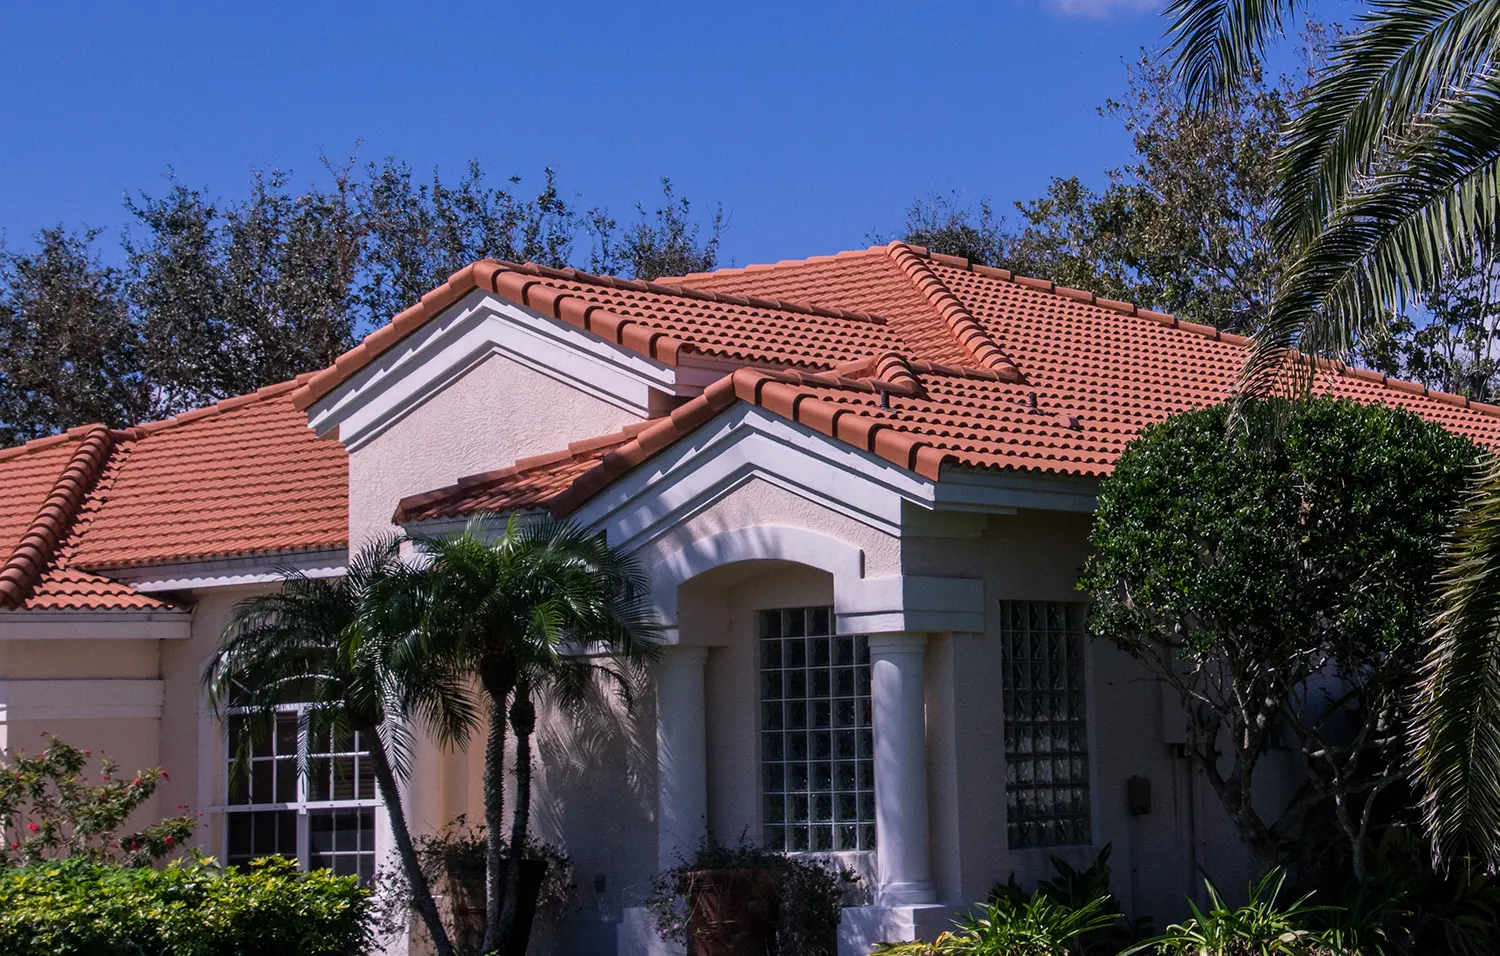 clay roofing tiles - 4